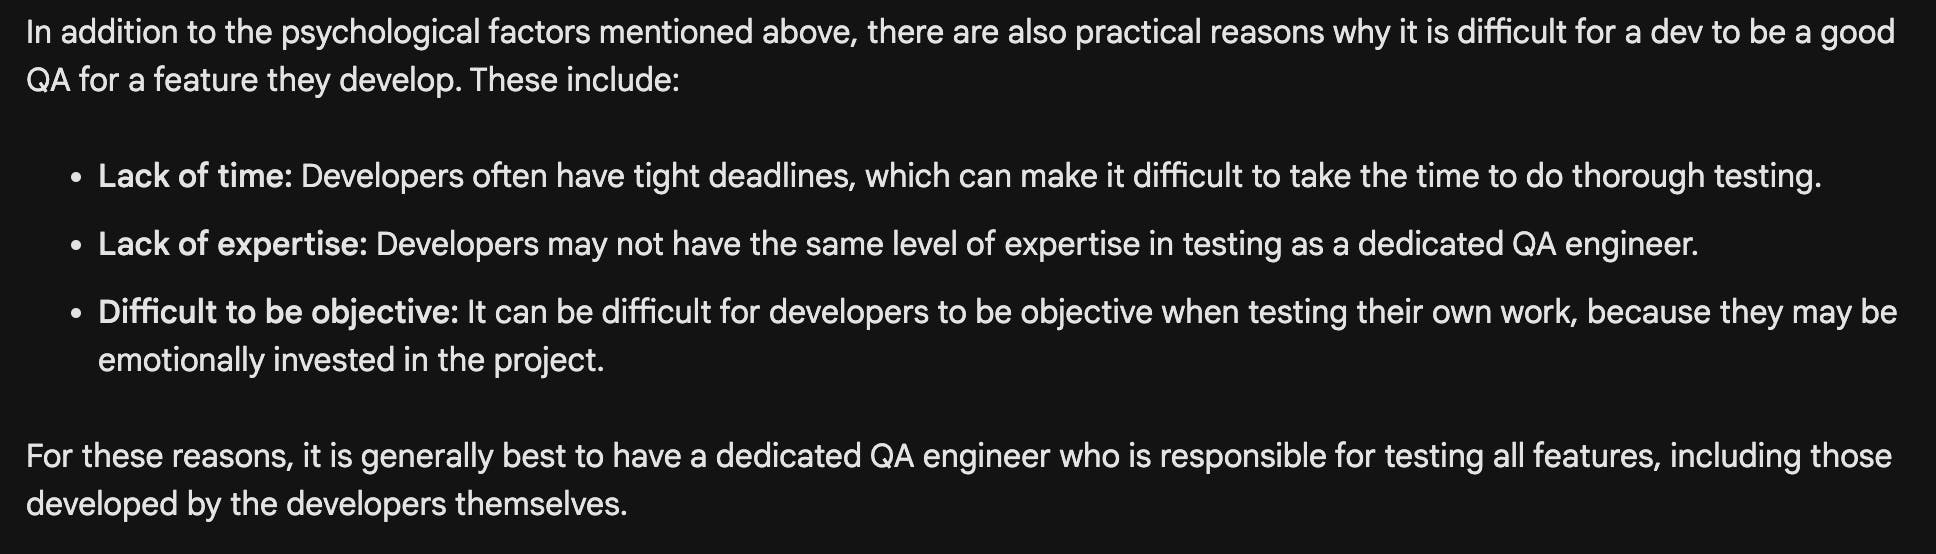 Bard's response to "what practical reasons are there for a dev not being good at QA for a feature they develop?"